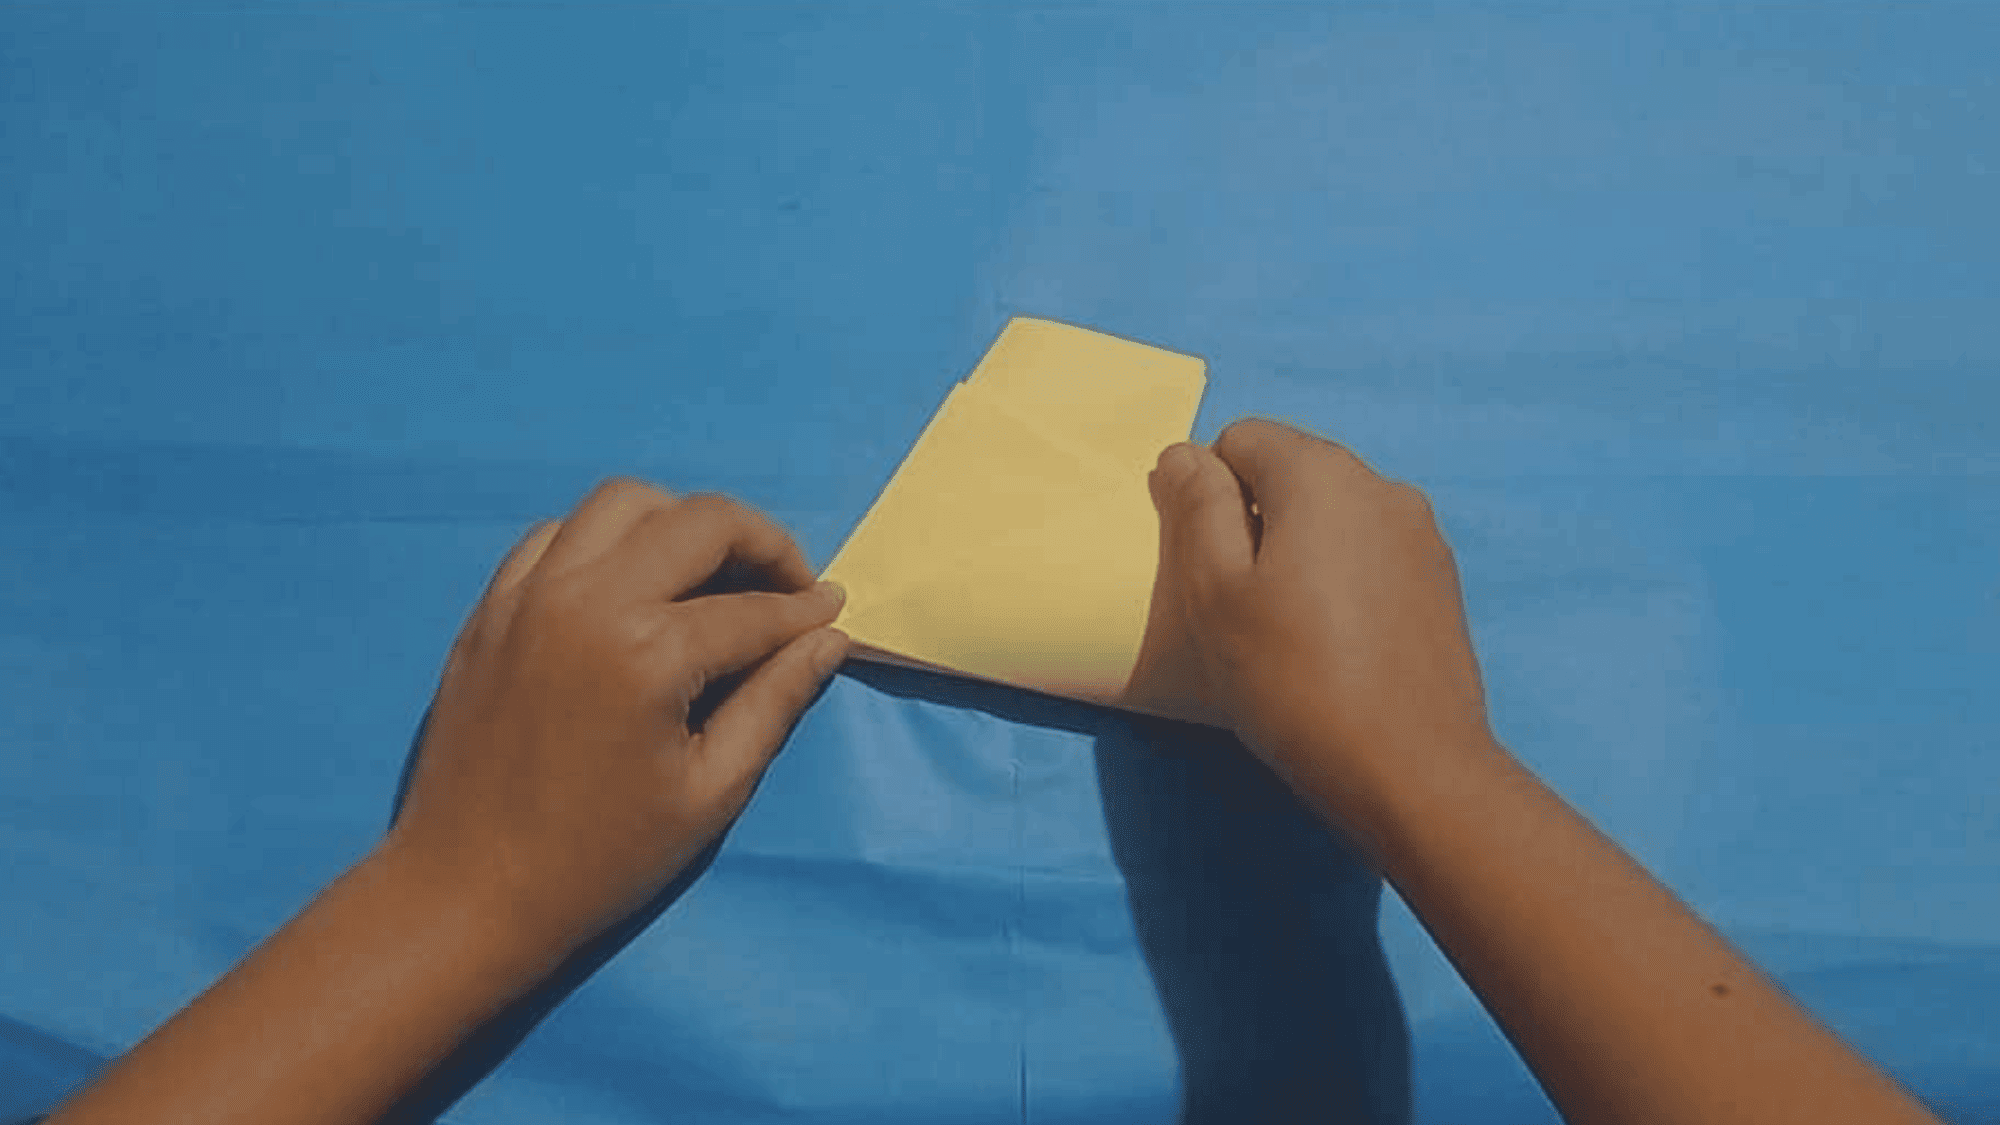 How To Make Origami Stars Origami Stars Instructions 4221